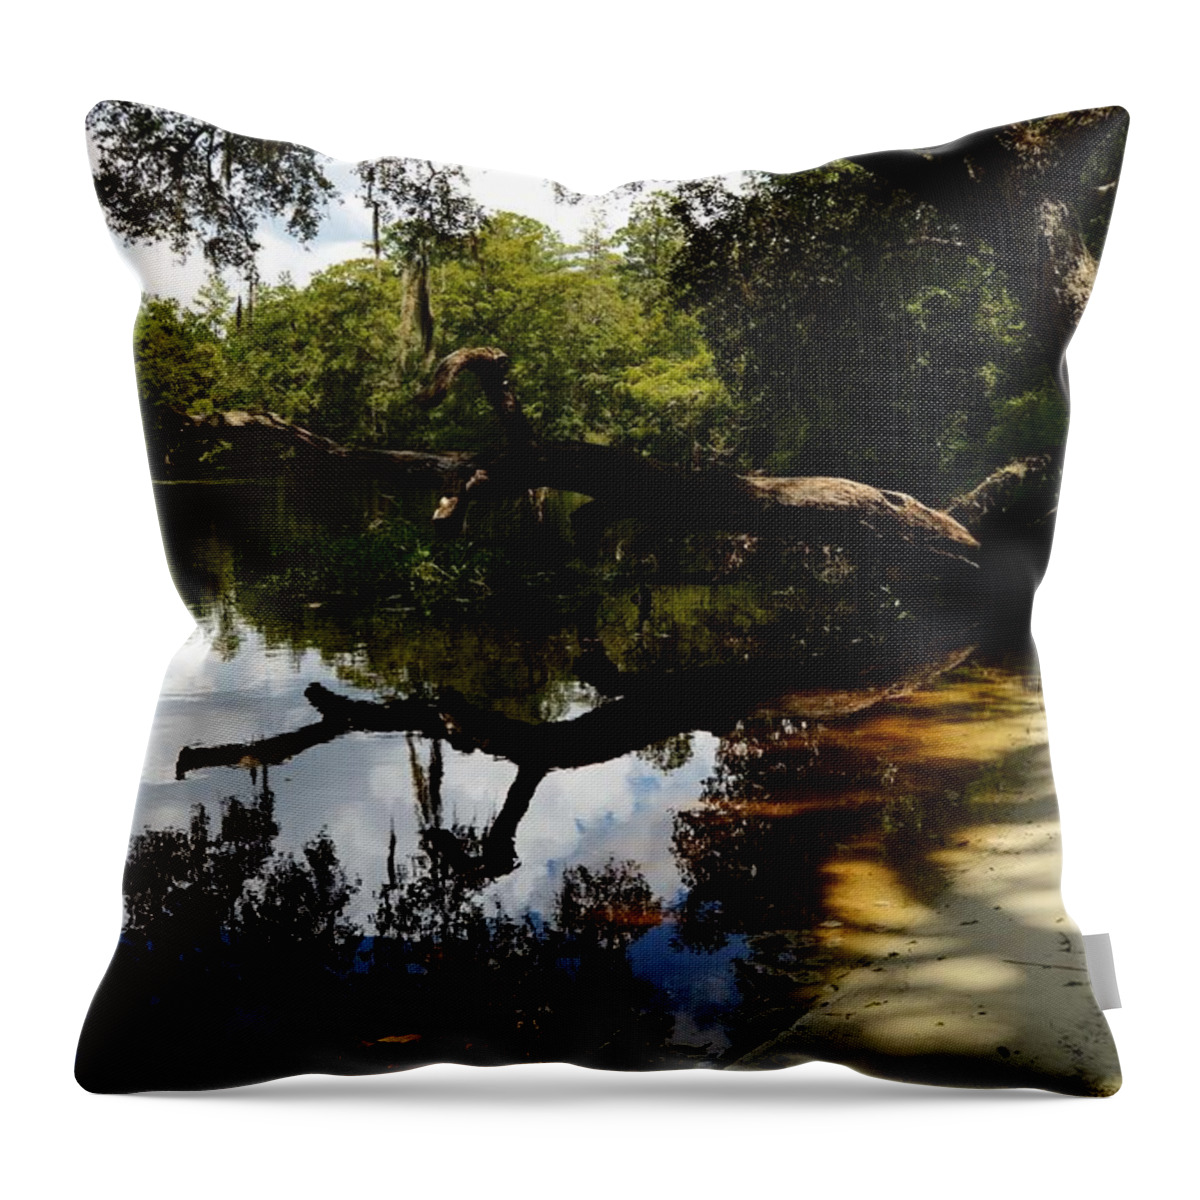 Reflections And Shadows Throw Pillow featuring the photograph Reflections and Shadows by Warren Thompson